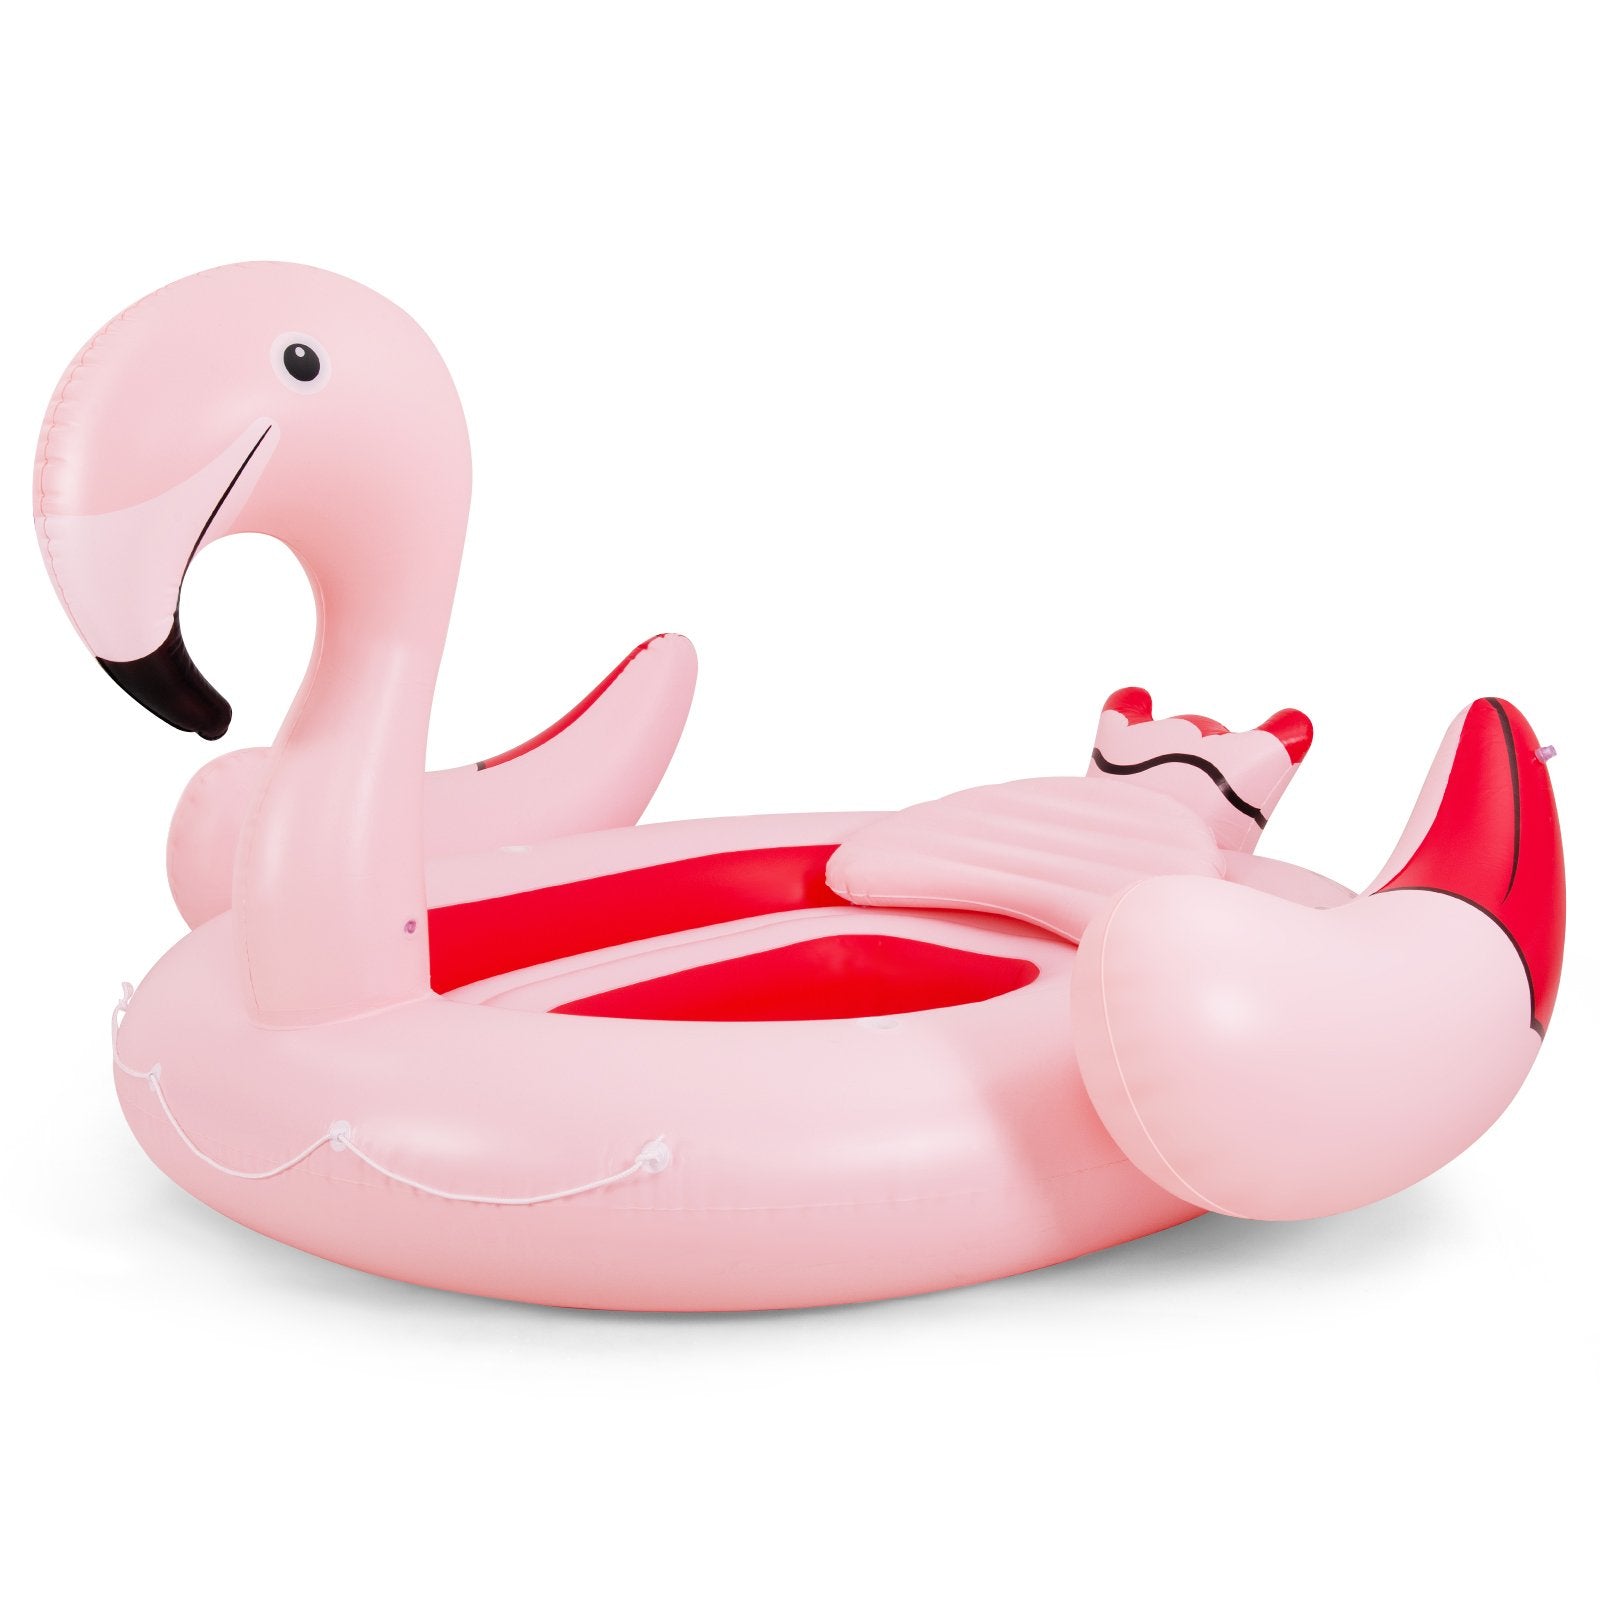 6 People Inflatable Flamingo Floating Island with 6 Cup Holders for Pool and River, Pink at Gallery Canada